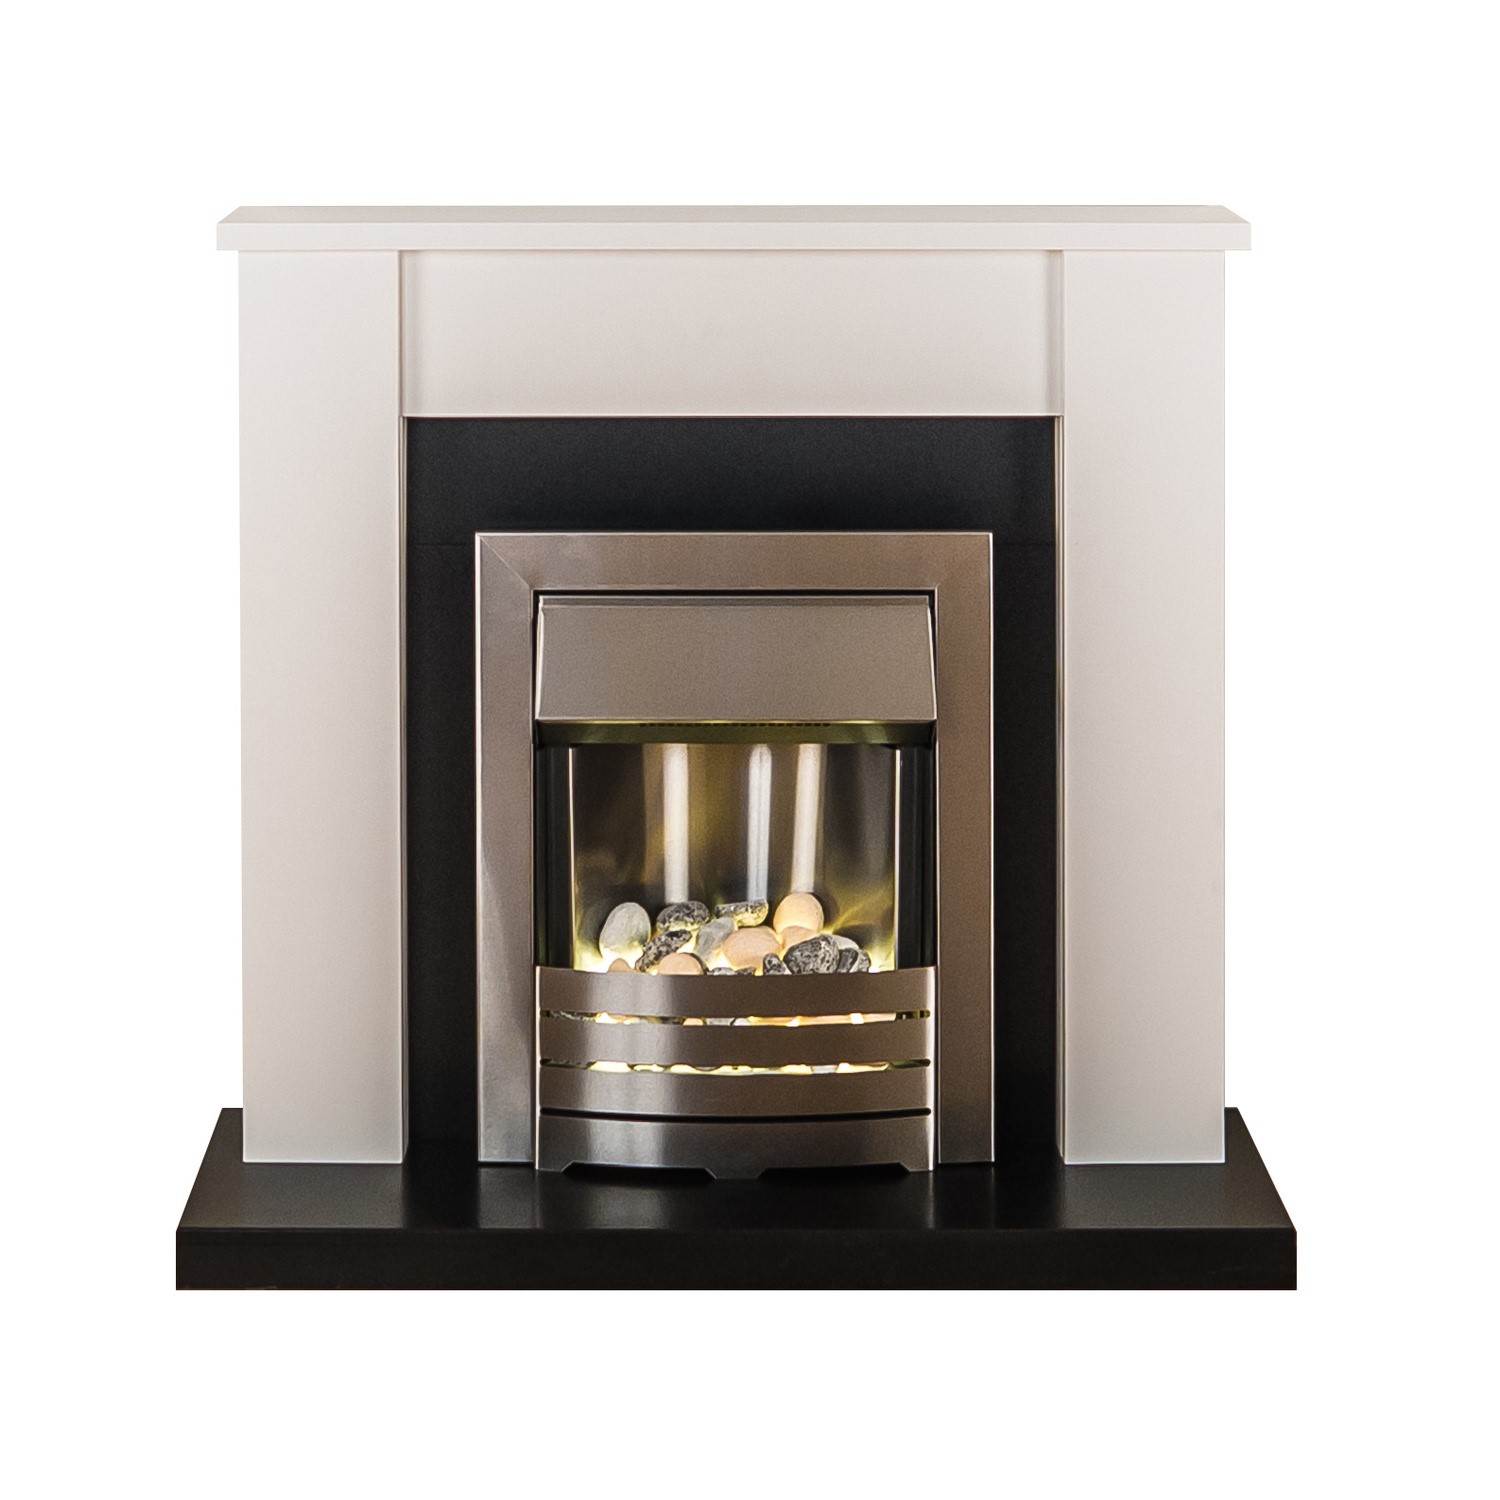 Photo of Adam white and chrome freestanding electric fireplace suite - solus